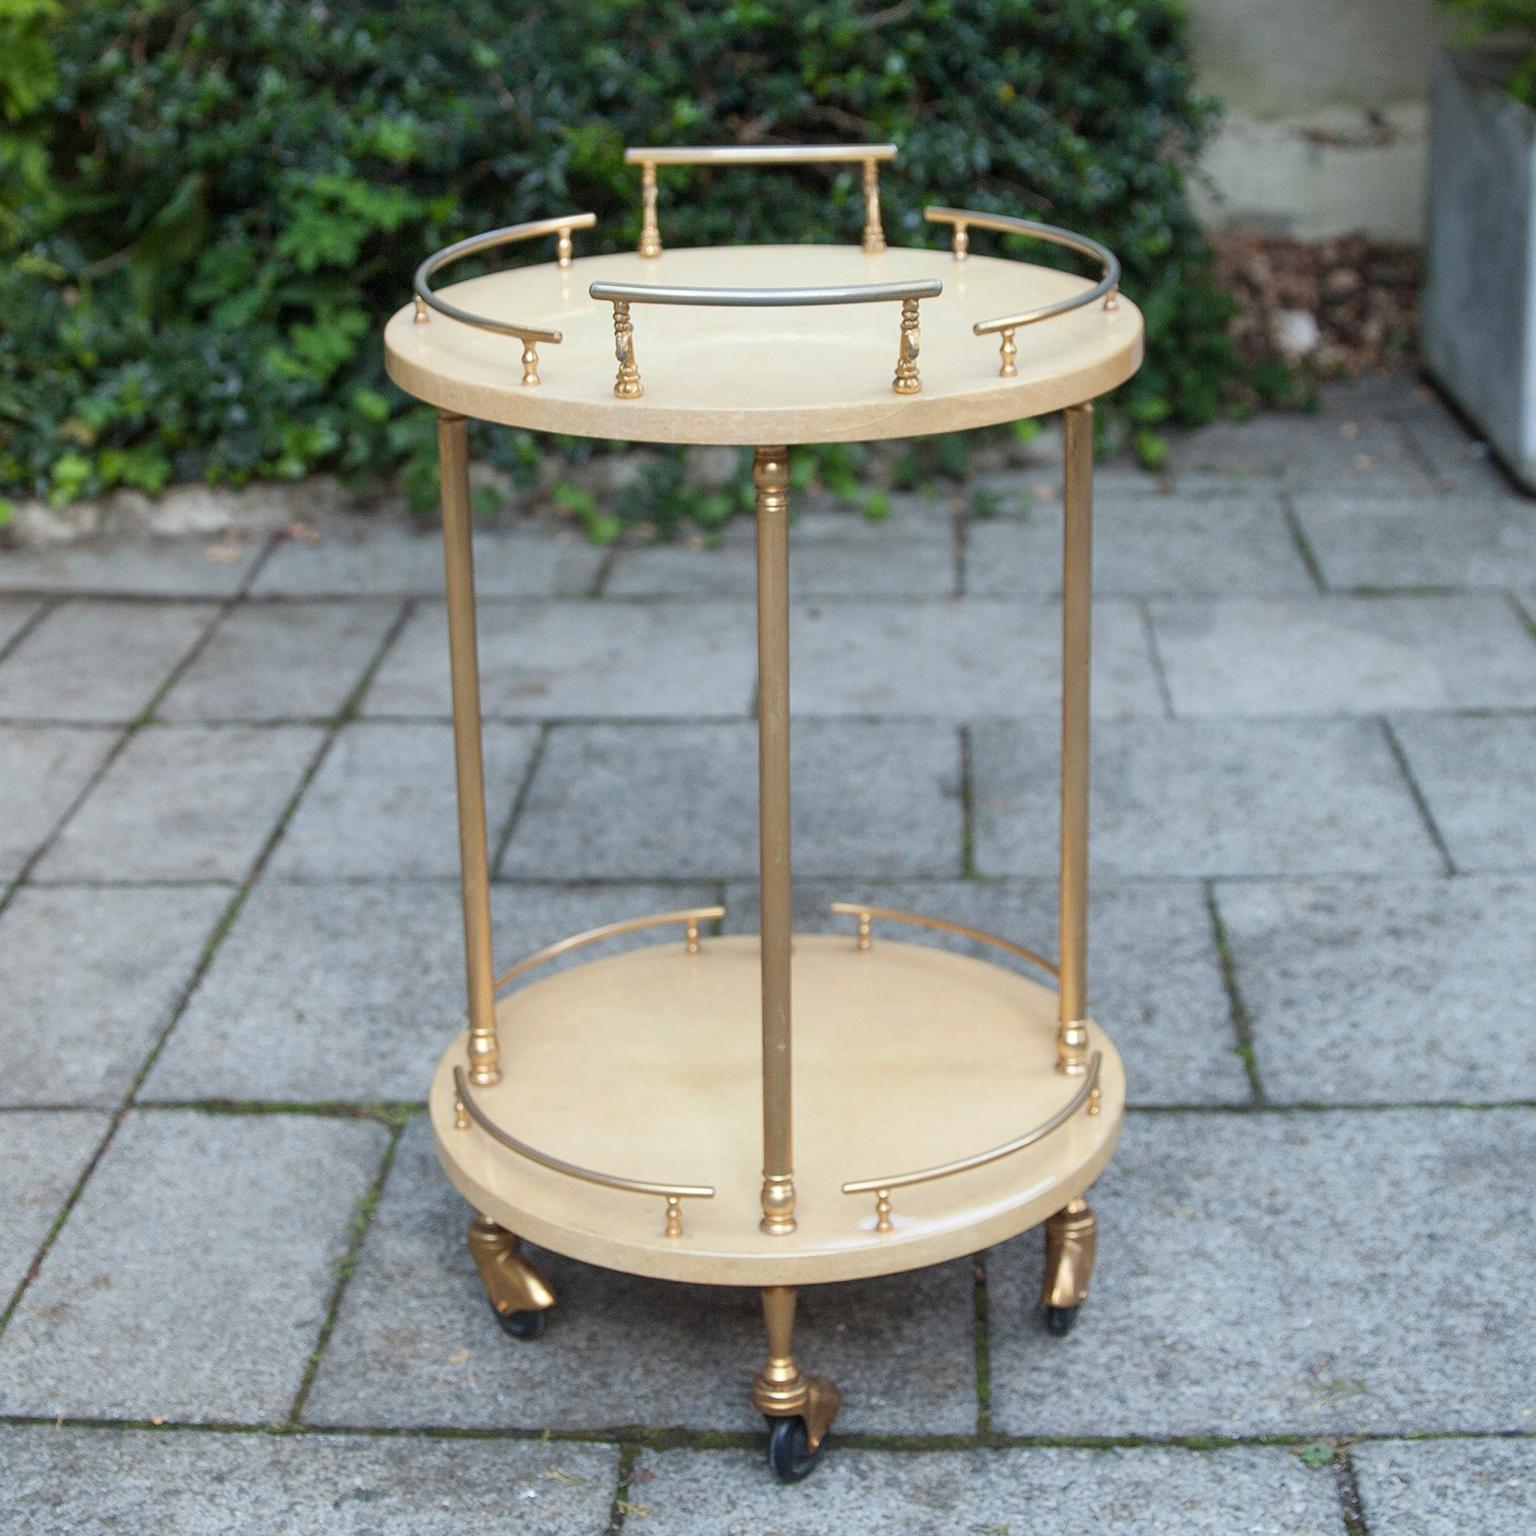 Round serving cart with brass applications made by Aldo Tura in the 1960s.
This particular bar cart was executed, circa 1960 and is in very good condition. Along with artists like Piero Fornasetti and Carlo Bugatti, Aldo Tura (1909-1963) definitely